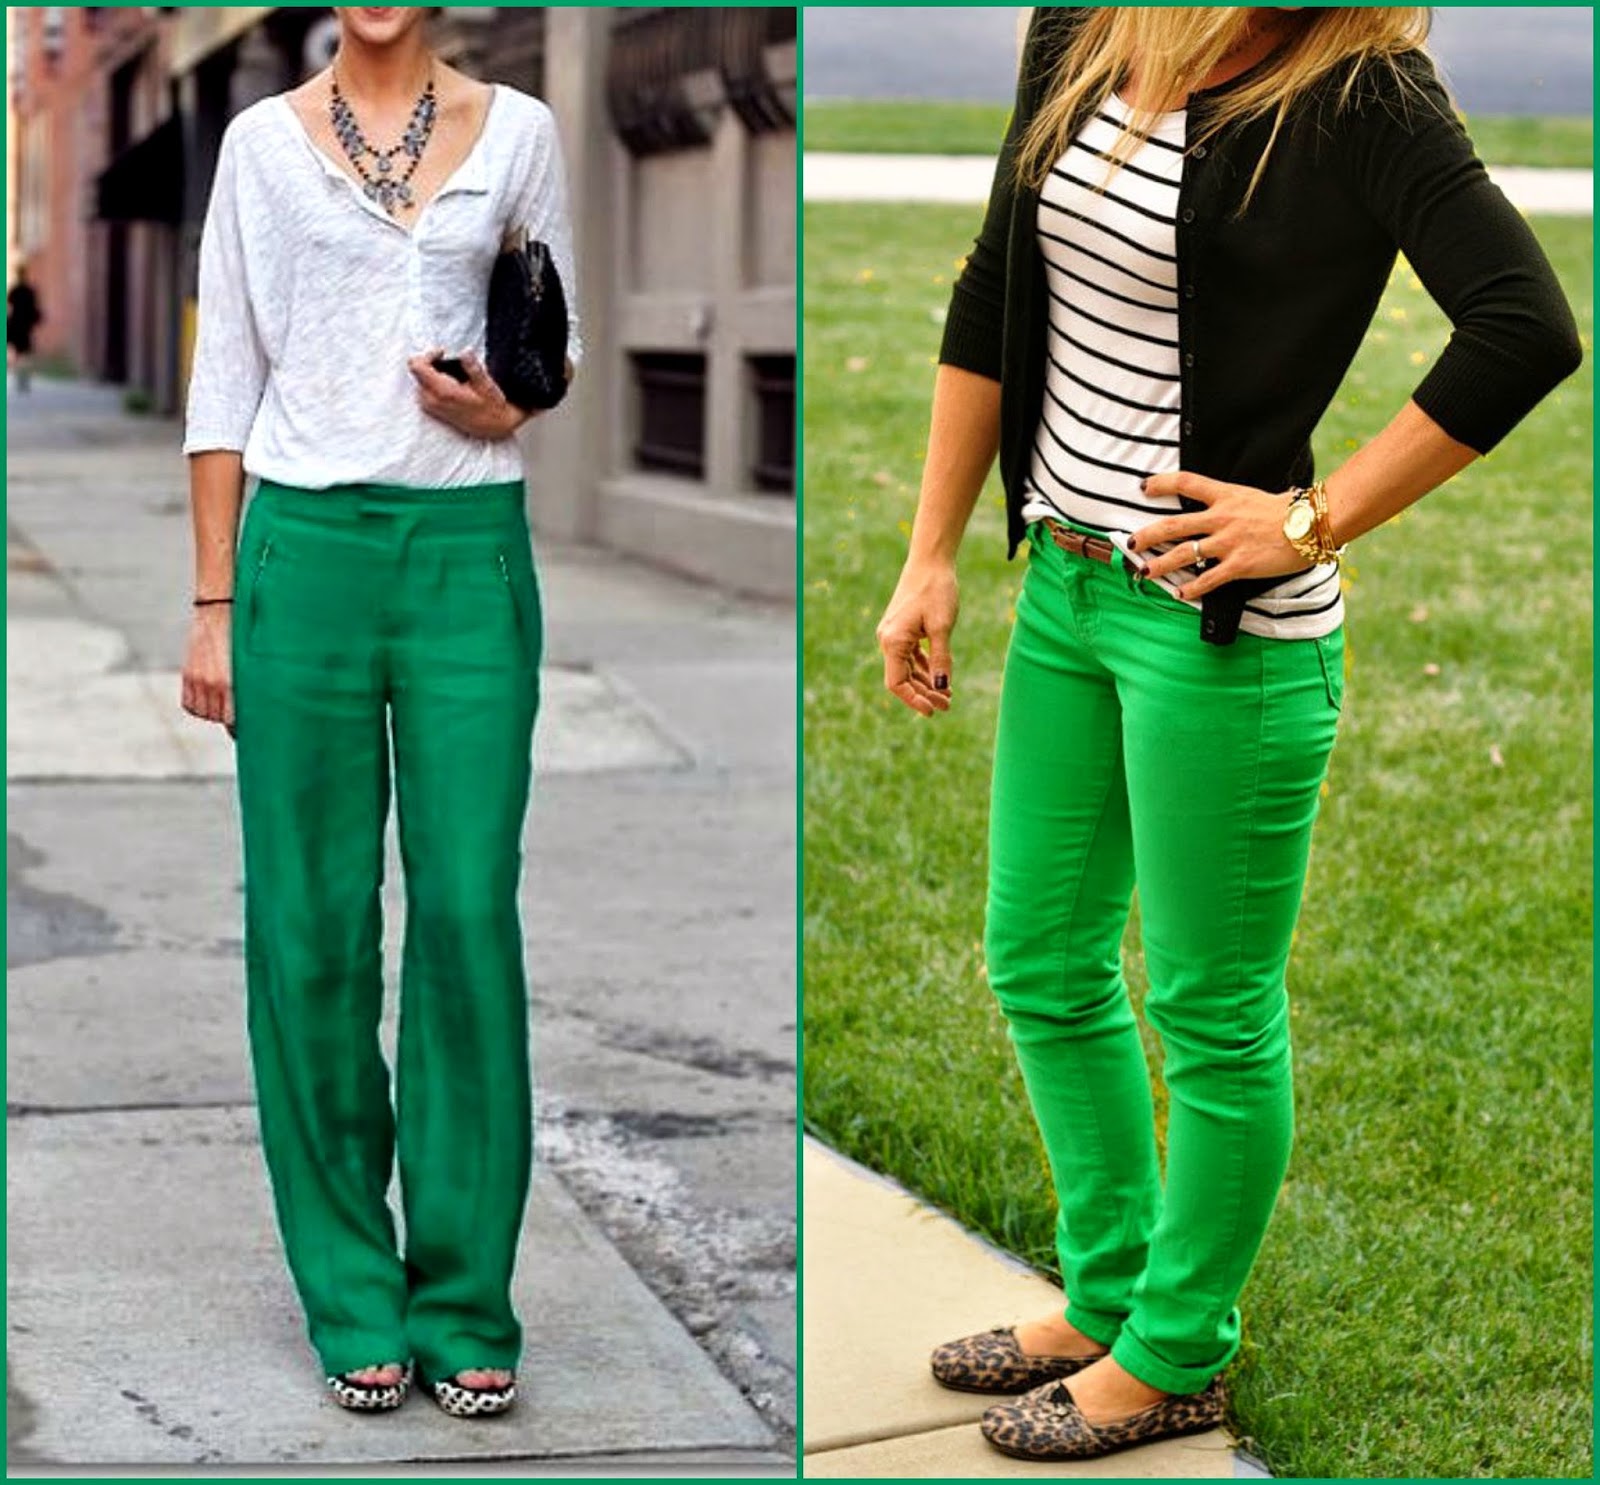 5 Ways to Wear Green Pants - Poise Passion